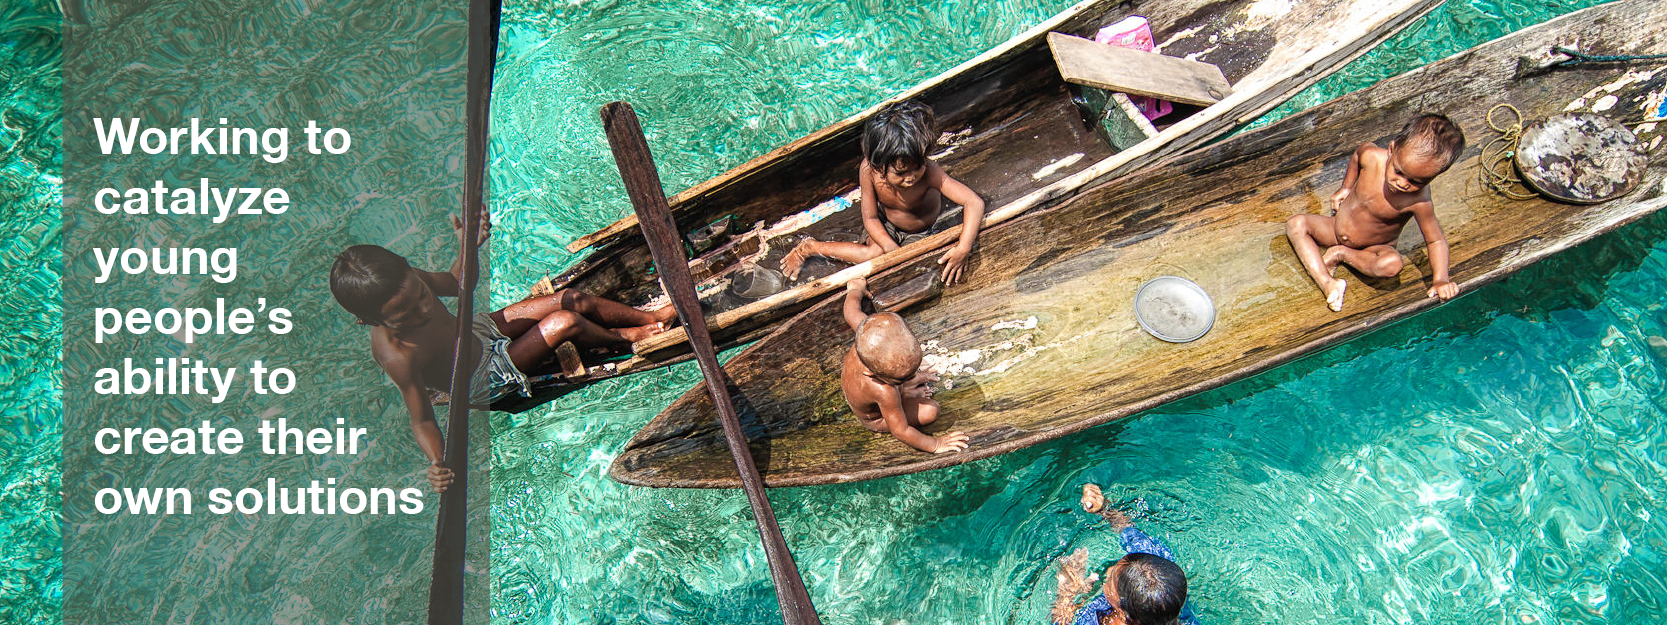 In Malaysia, young members of the Sea Gypsies, an ethnic group indigenous to south-east Asia, spend time in a boat. The Sea Gypsies free-dive to depths of 20 meters for 5 minutes at a time to fish.